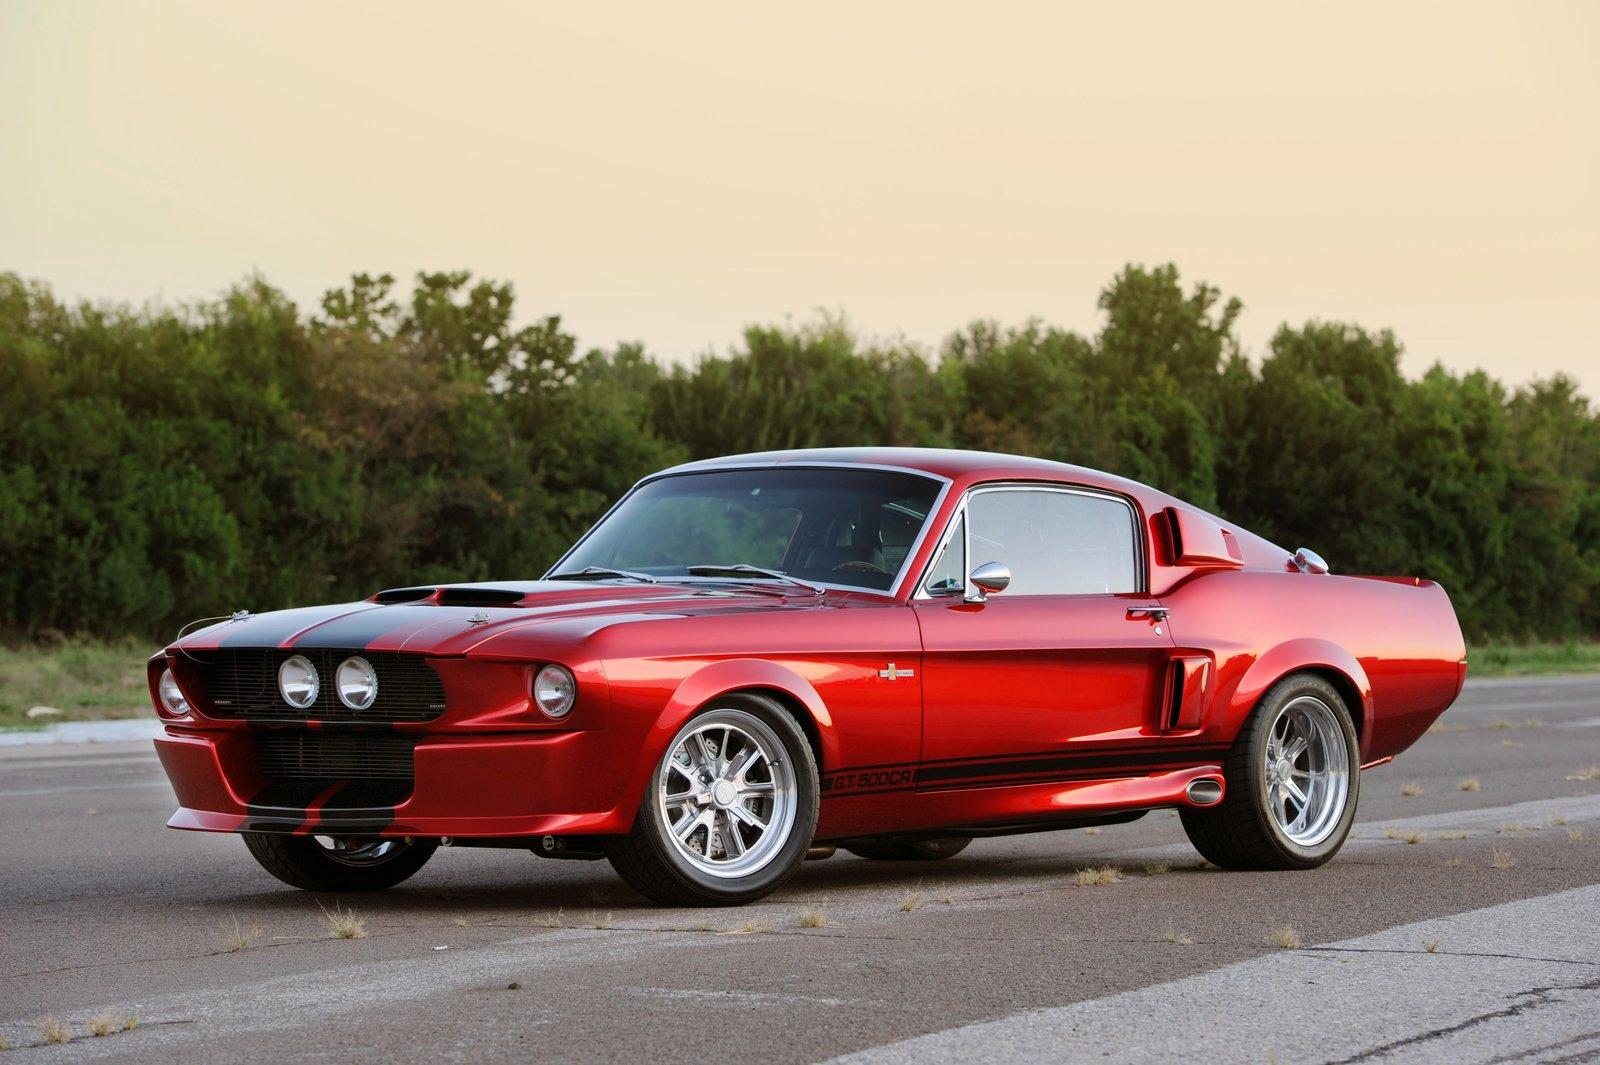 1967, Classic recreations, Shelby, Gt500cr, Muscle, Classic, Hot, Rod, Rods, Mustang, Ford Wallpaper